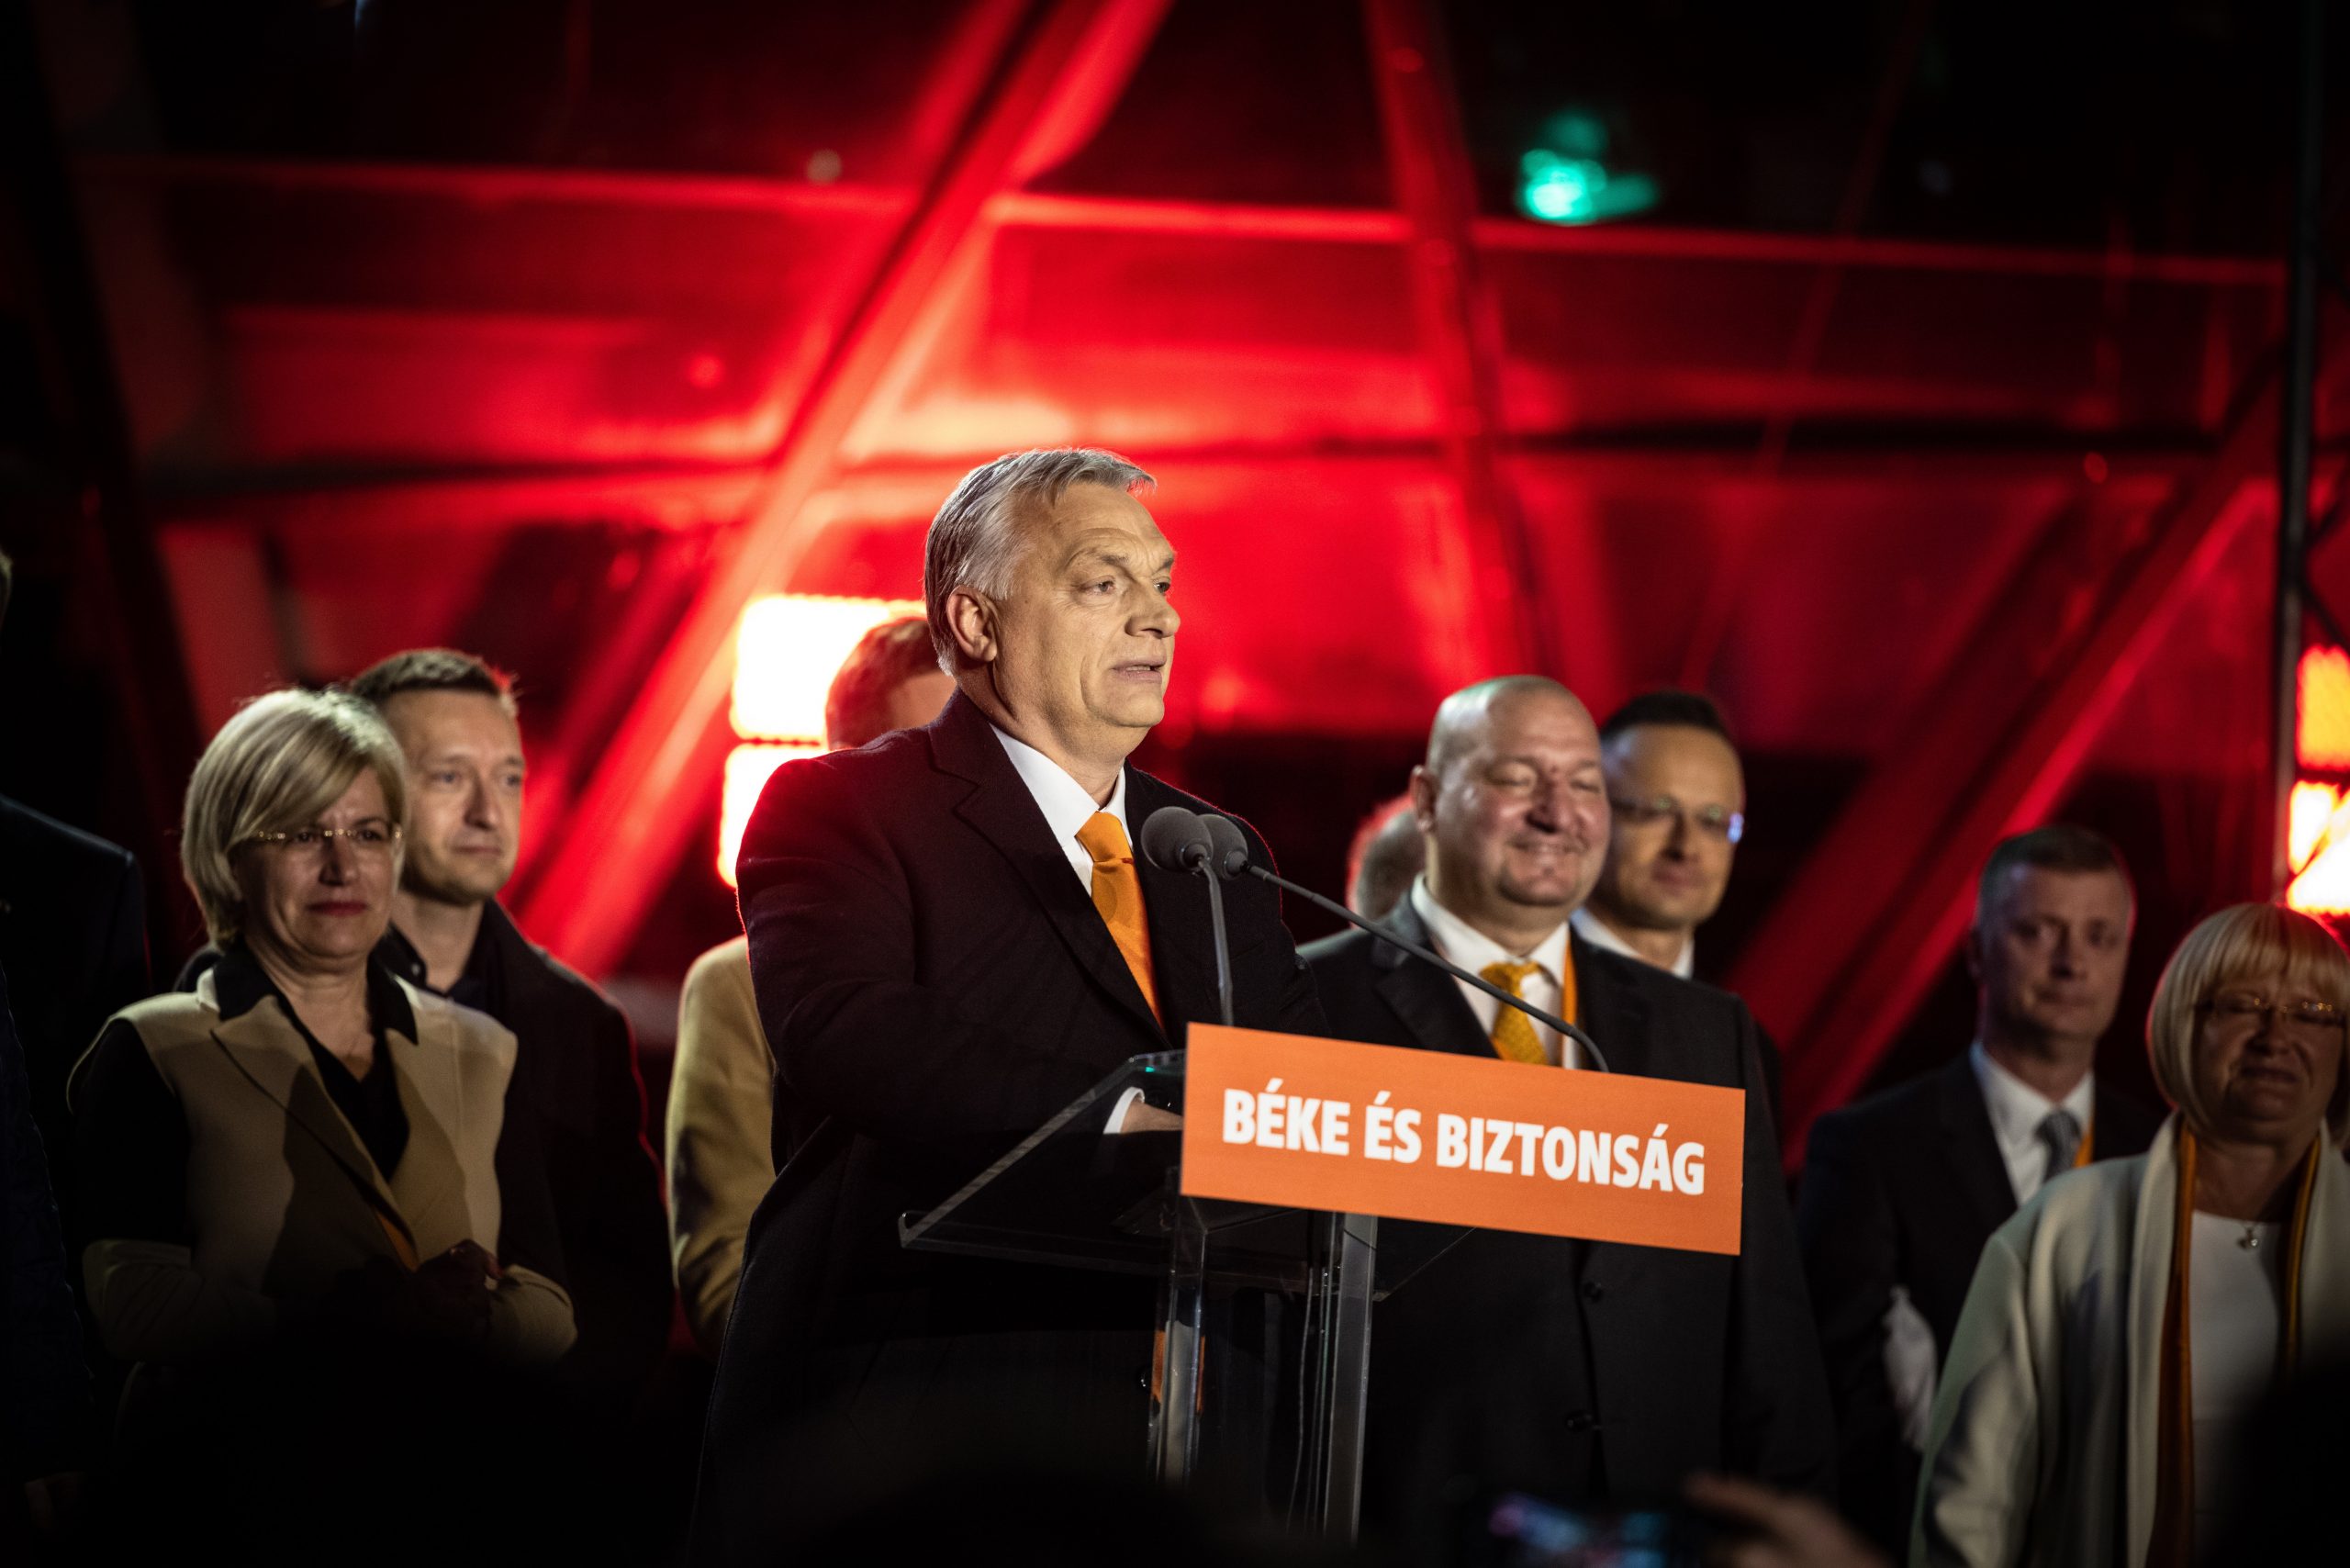 All votes counted, Fidesz wins two-thirds majority